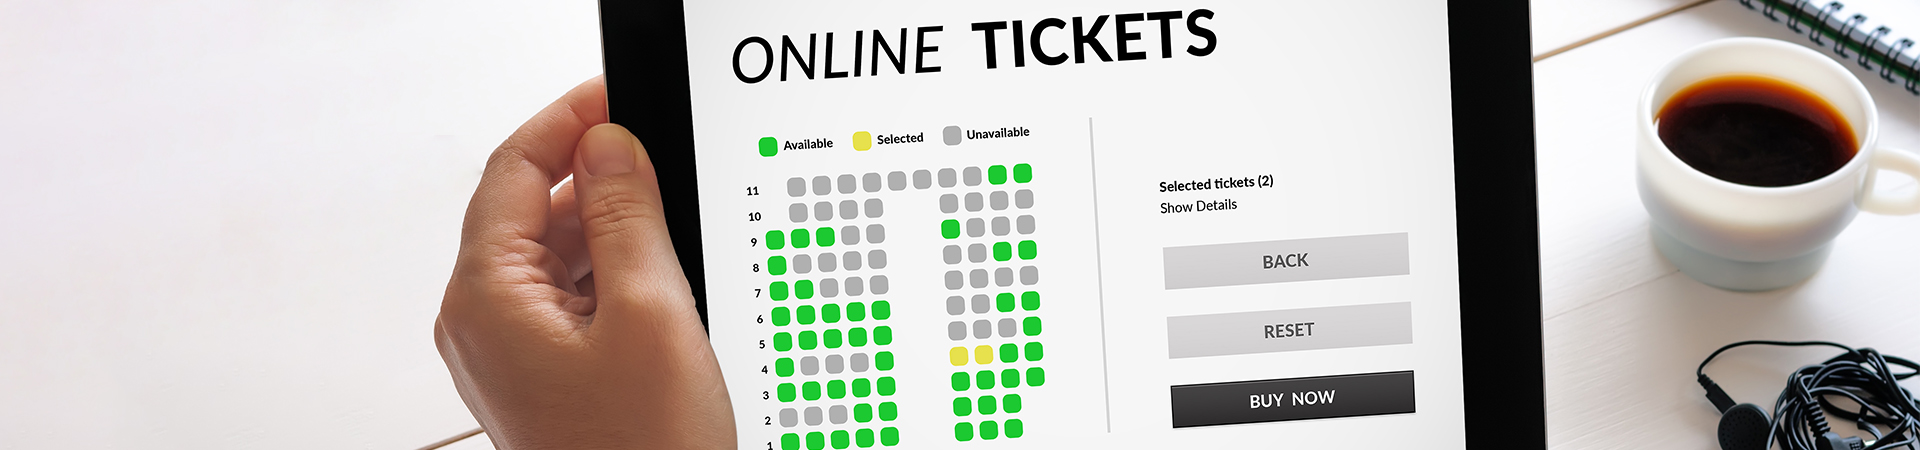 Performance Testing of a Digital Ticketing Software